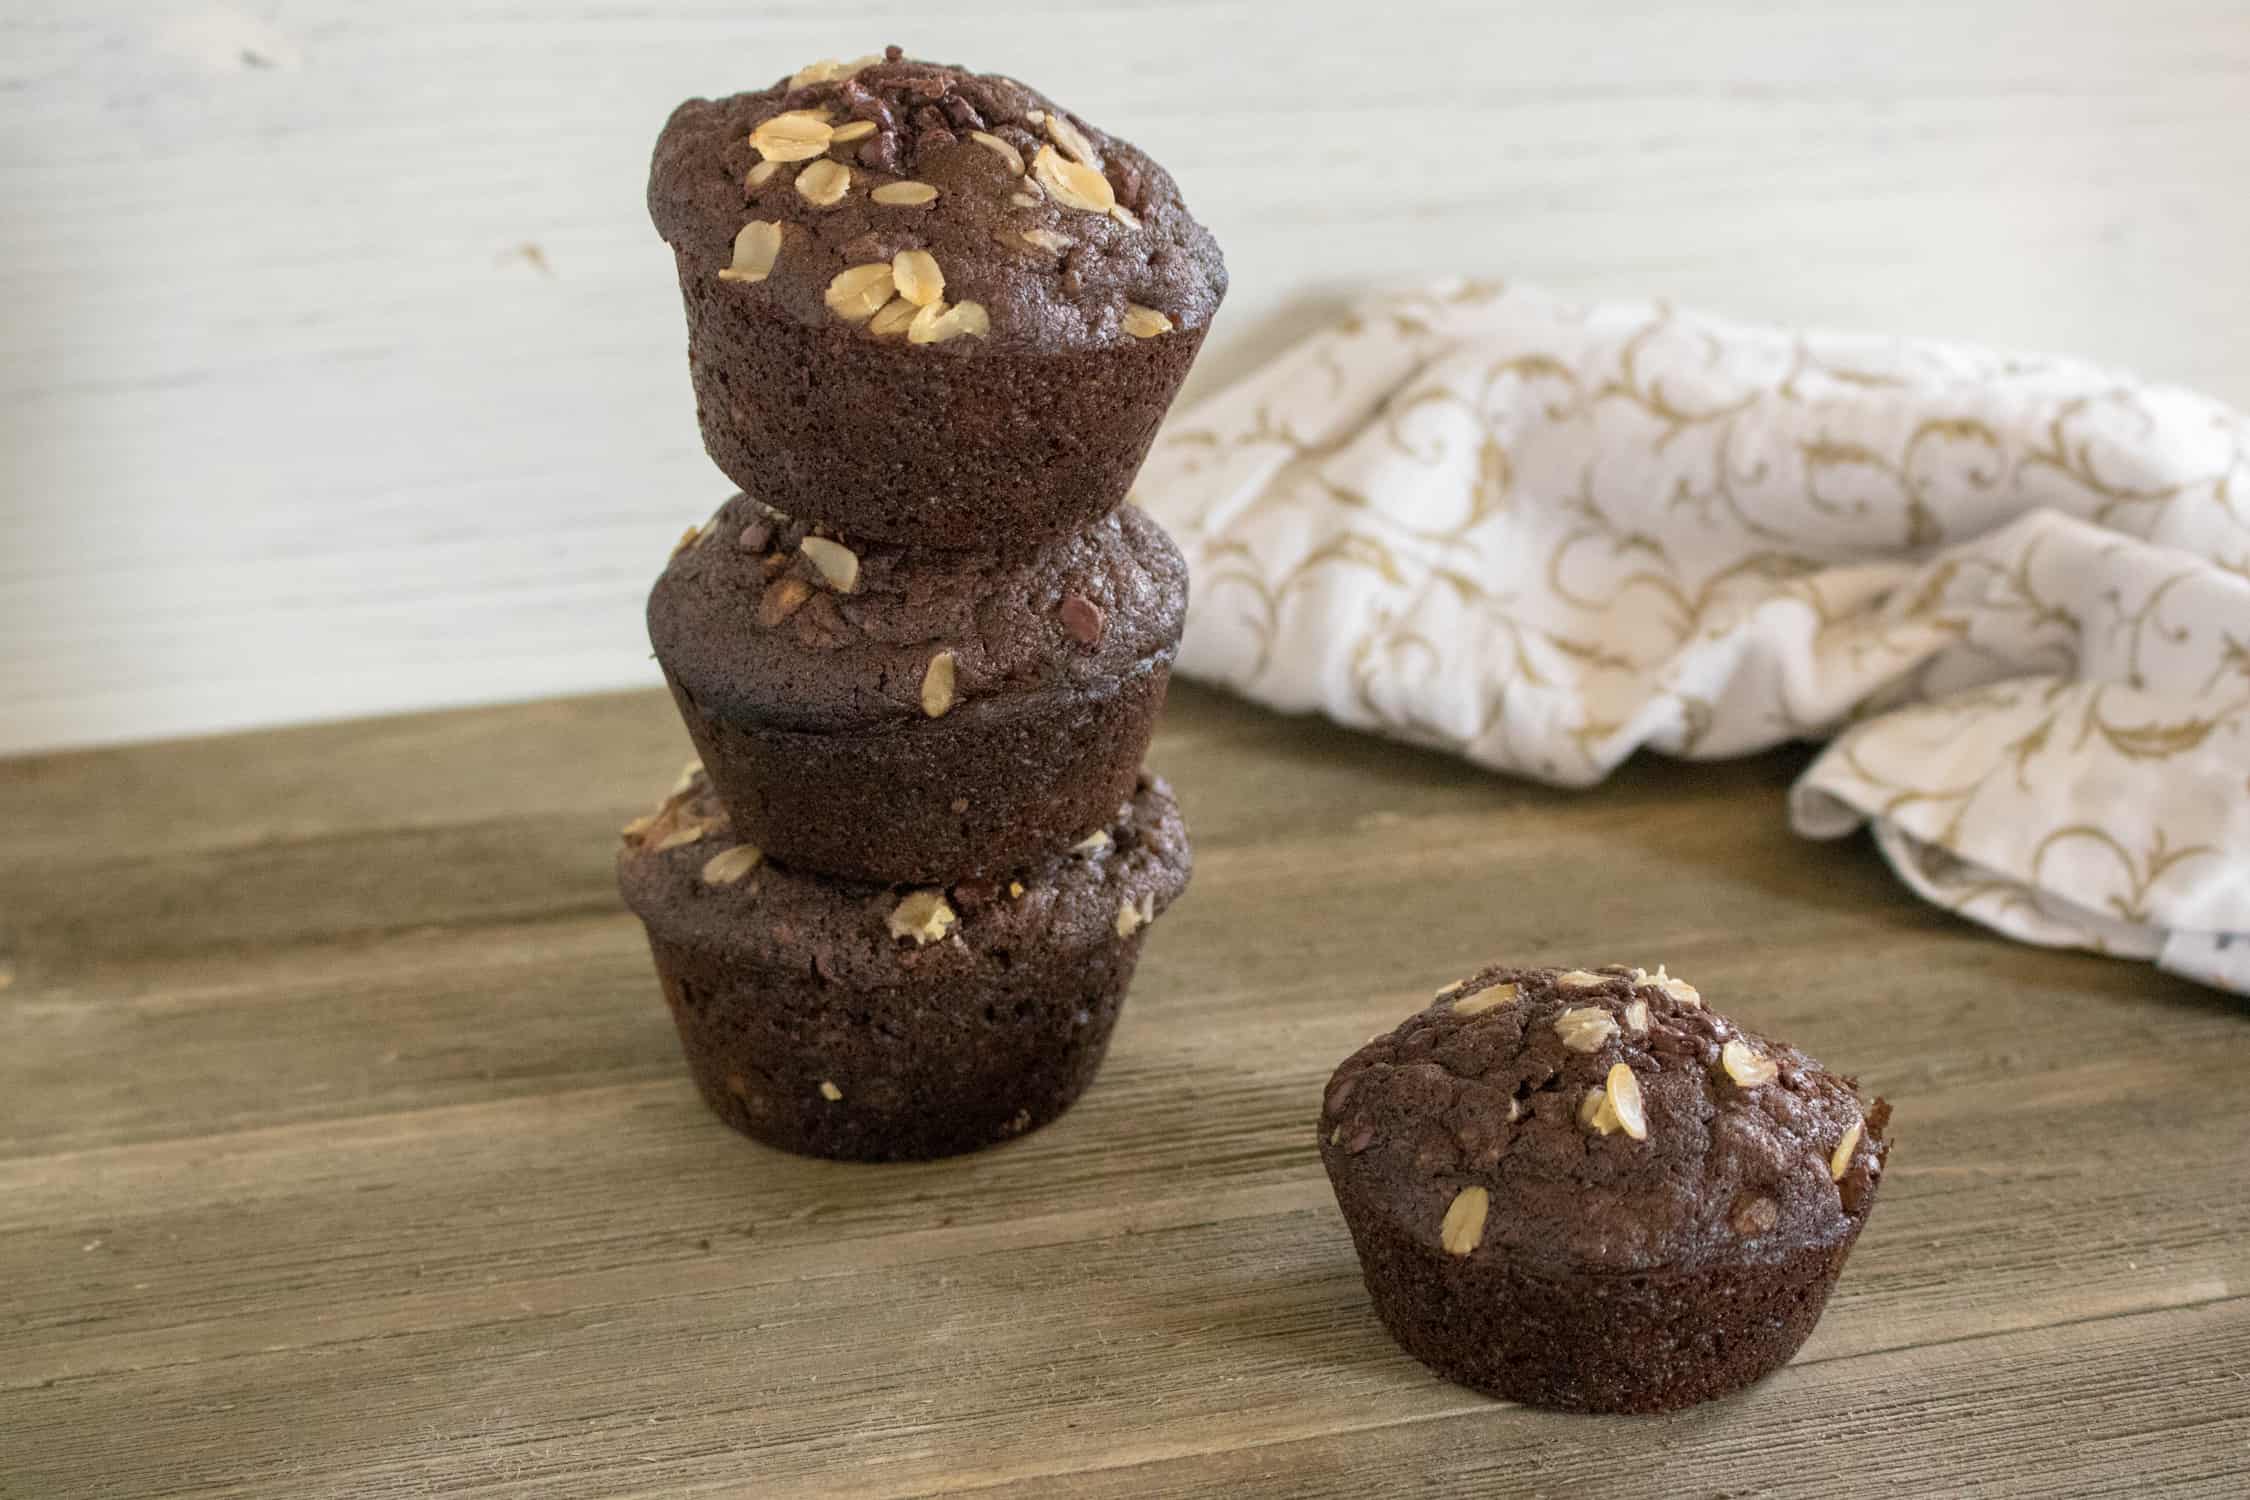 3 Chocolate Chocolate Chip Oatmeal Muffins stacked on top of each other with another muffin to the right sitting on a wooden table with a white and tan dishtowel in background